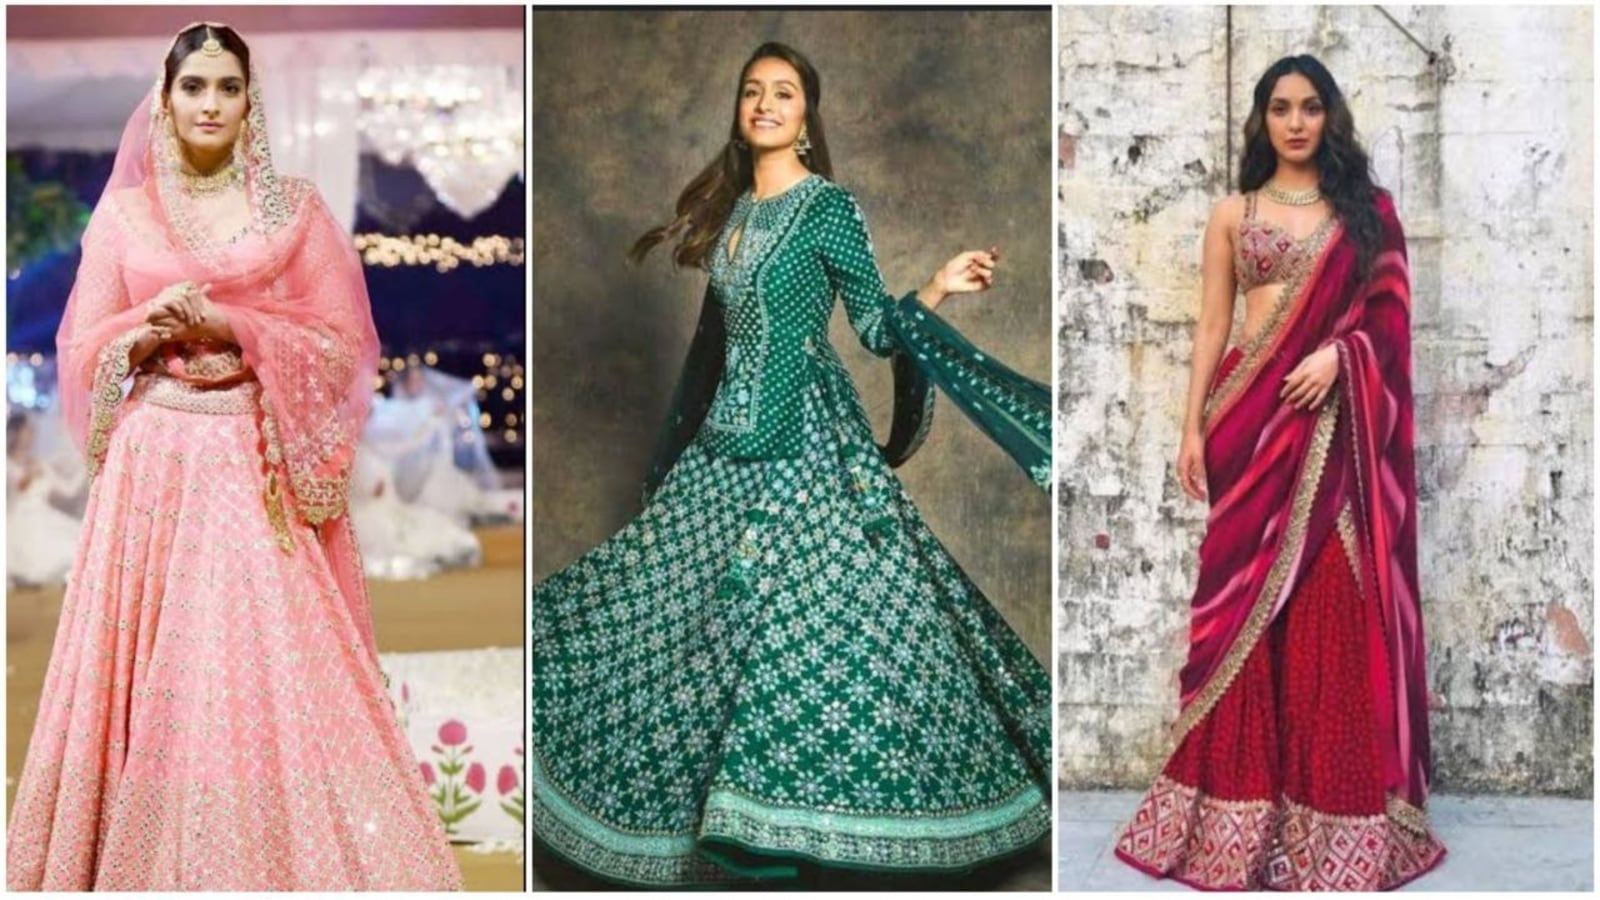 Learn 18 Different Styles Of Wearing Dupatta On Lehenga